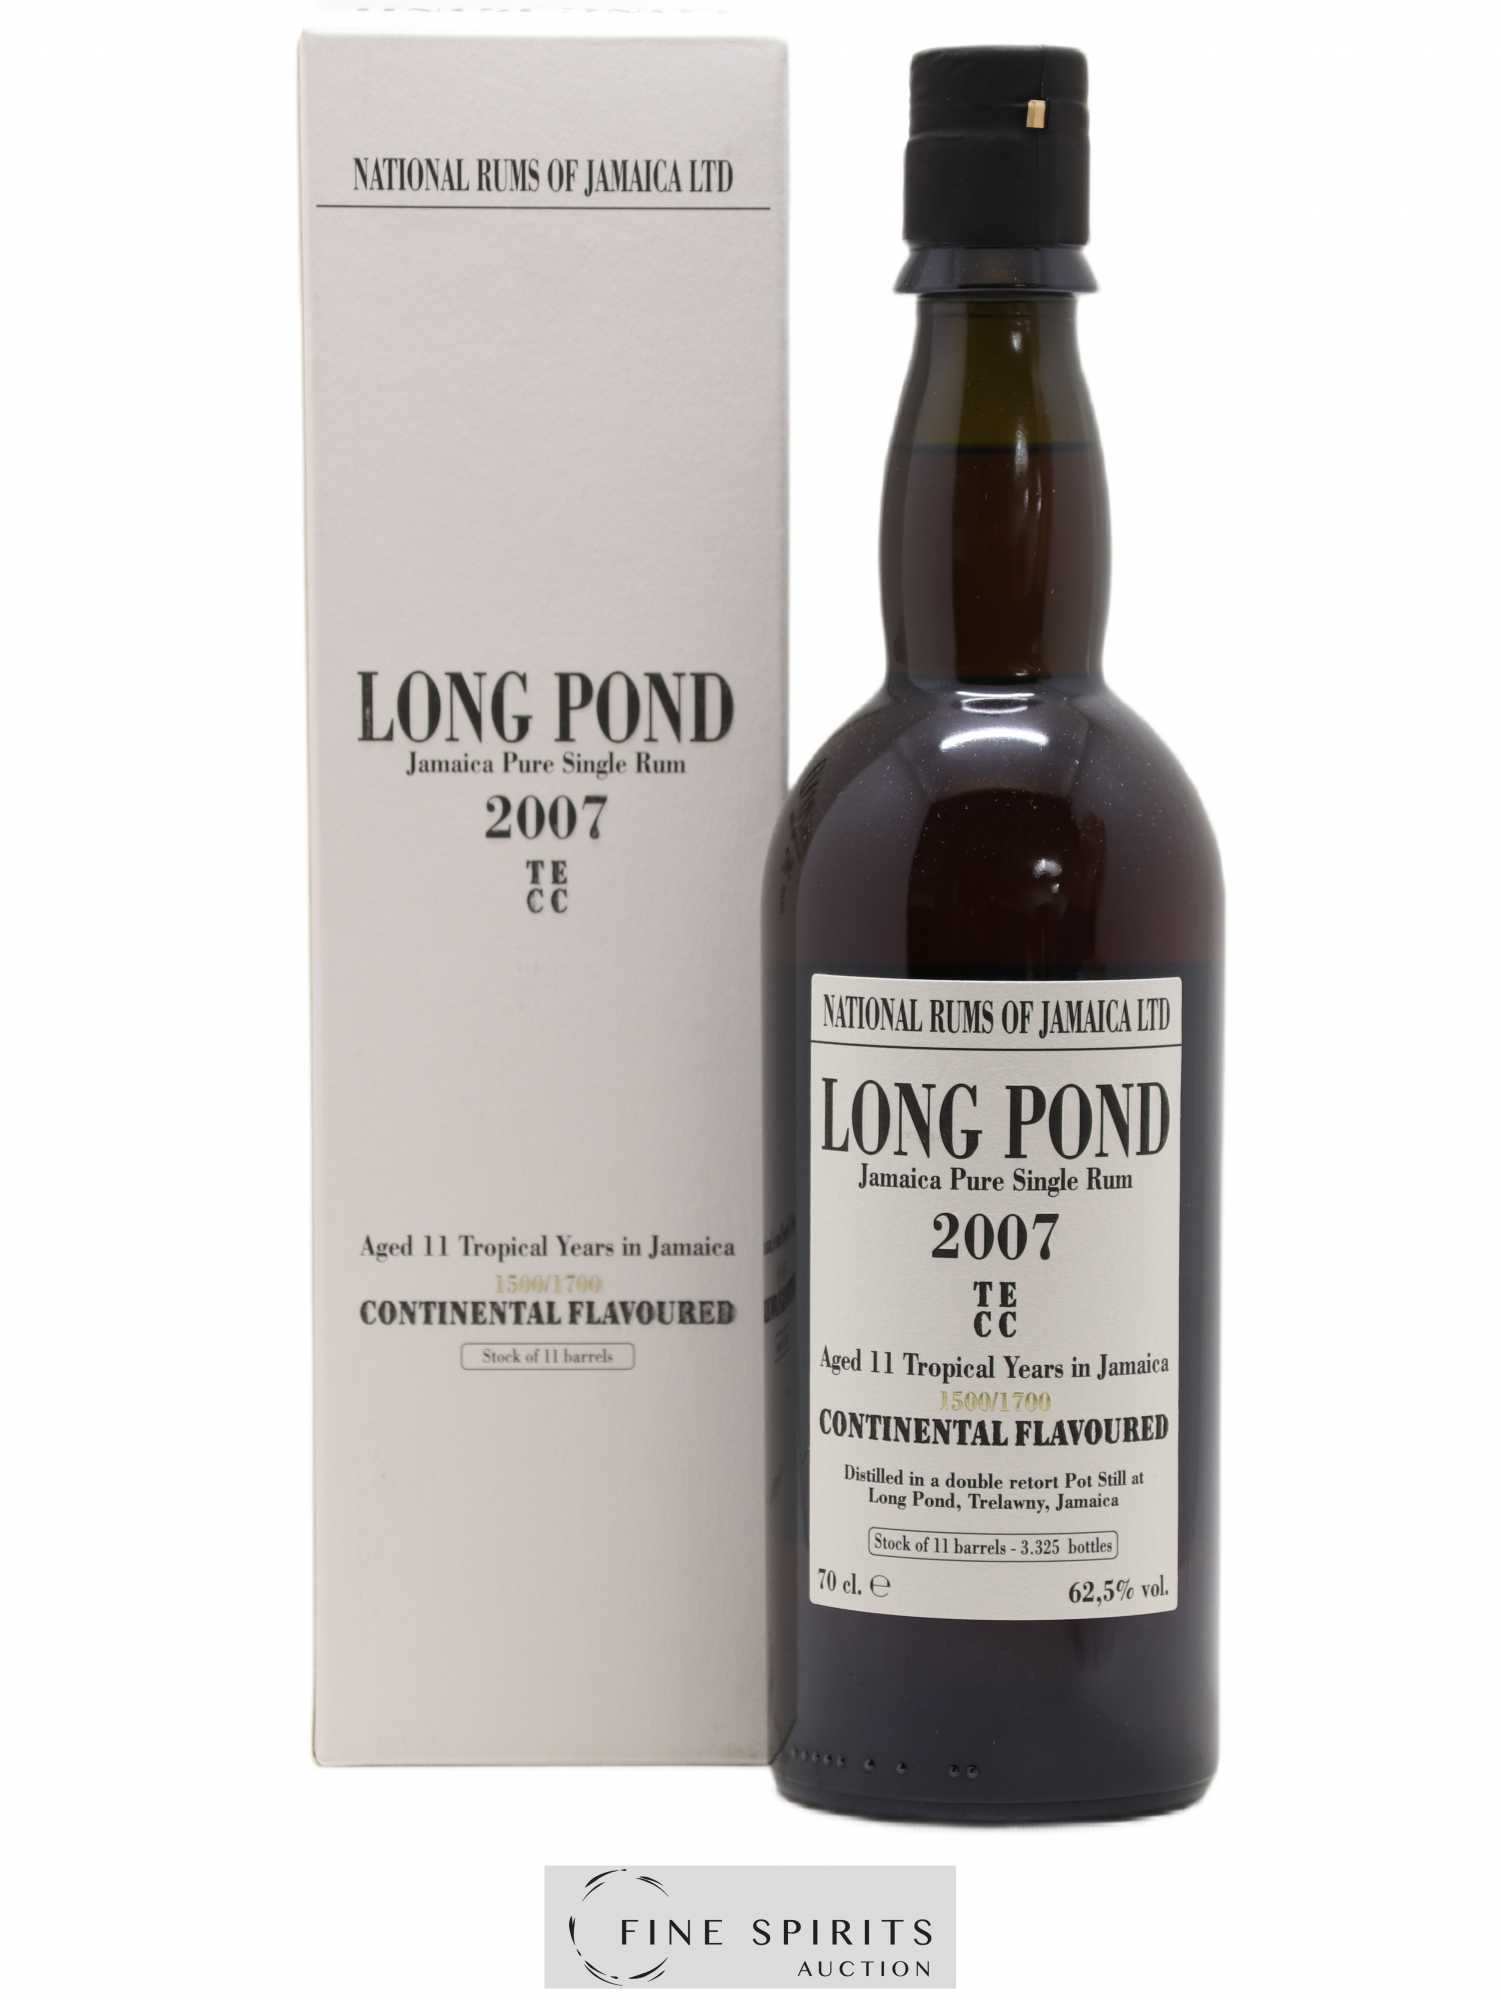 Long Pond 11 years 2007 Of. 15001700 Mark TECC - One of 3325 - bottled 2018 LM&V National Rums of Jamaica 